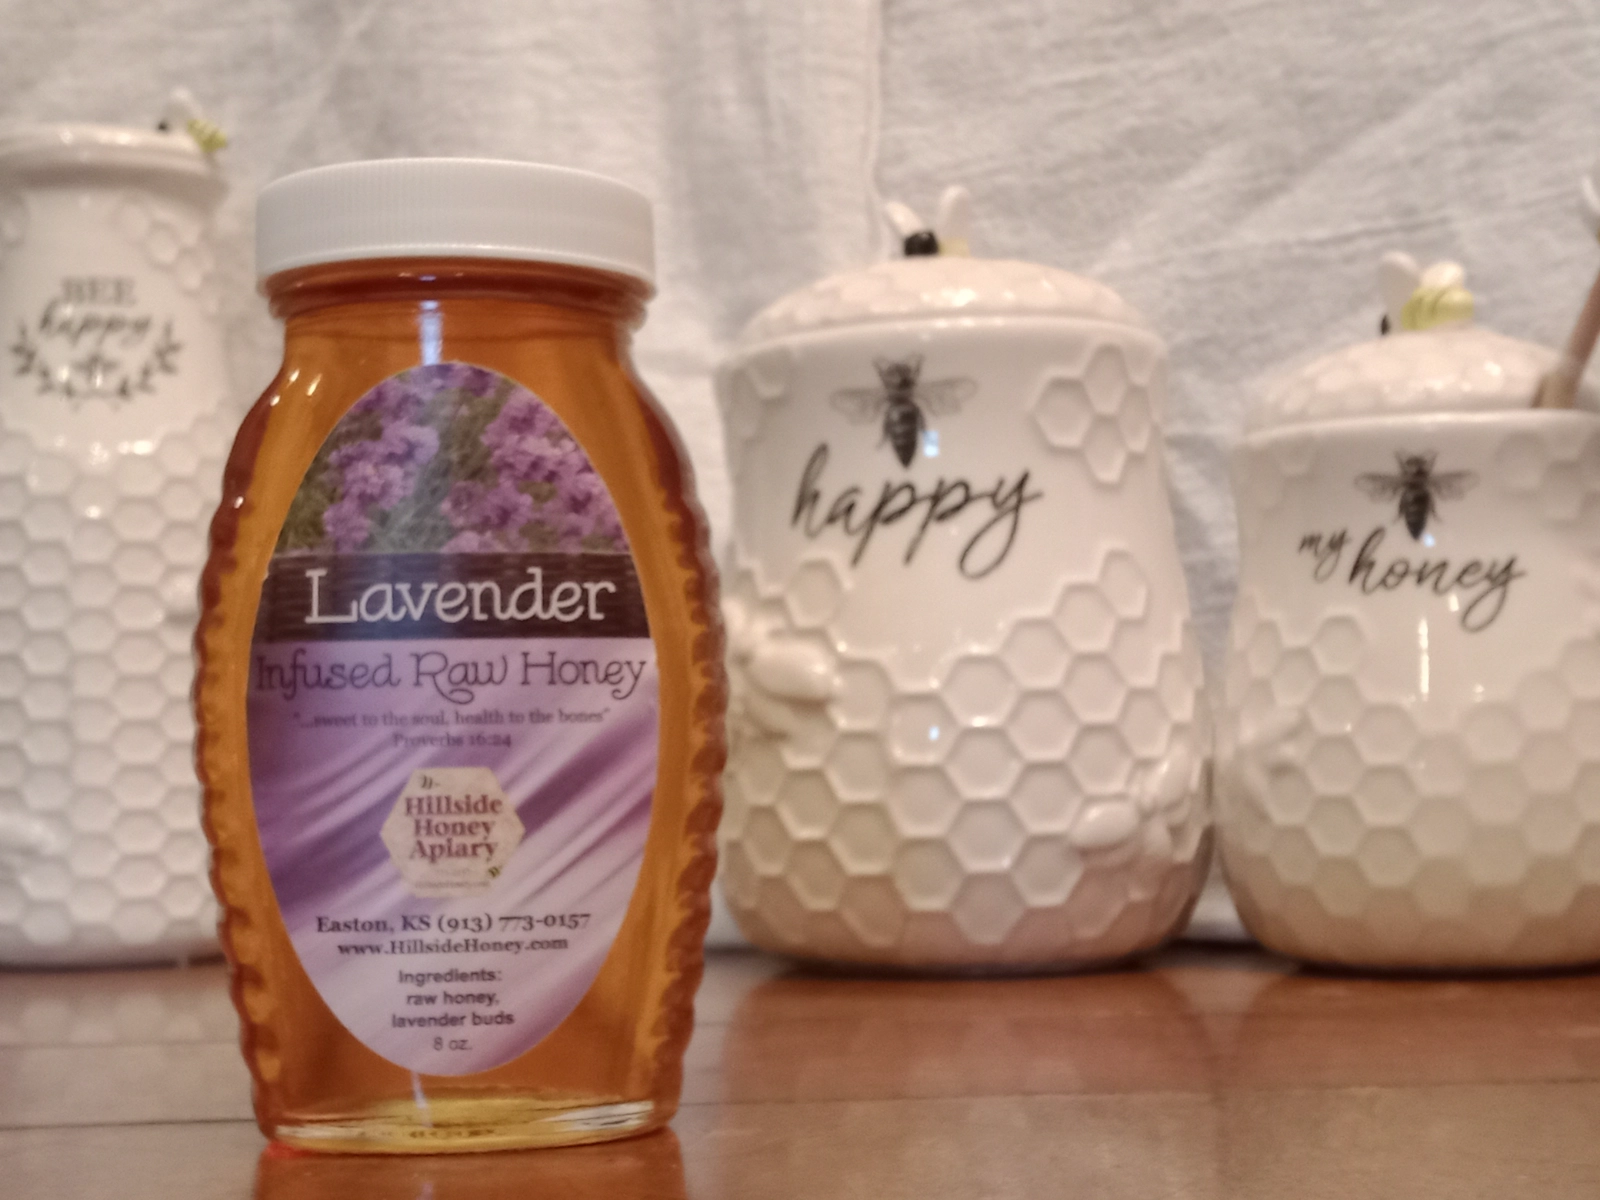 lavender-infused-raw-honey-in-8-oz-glass